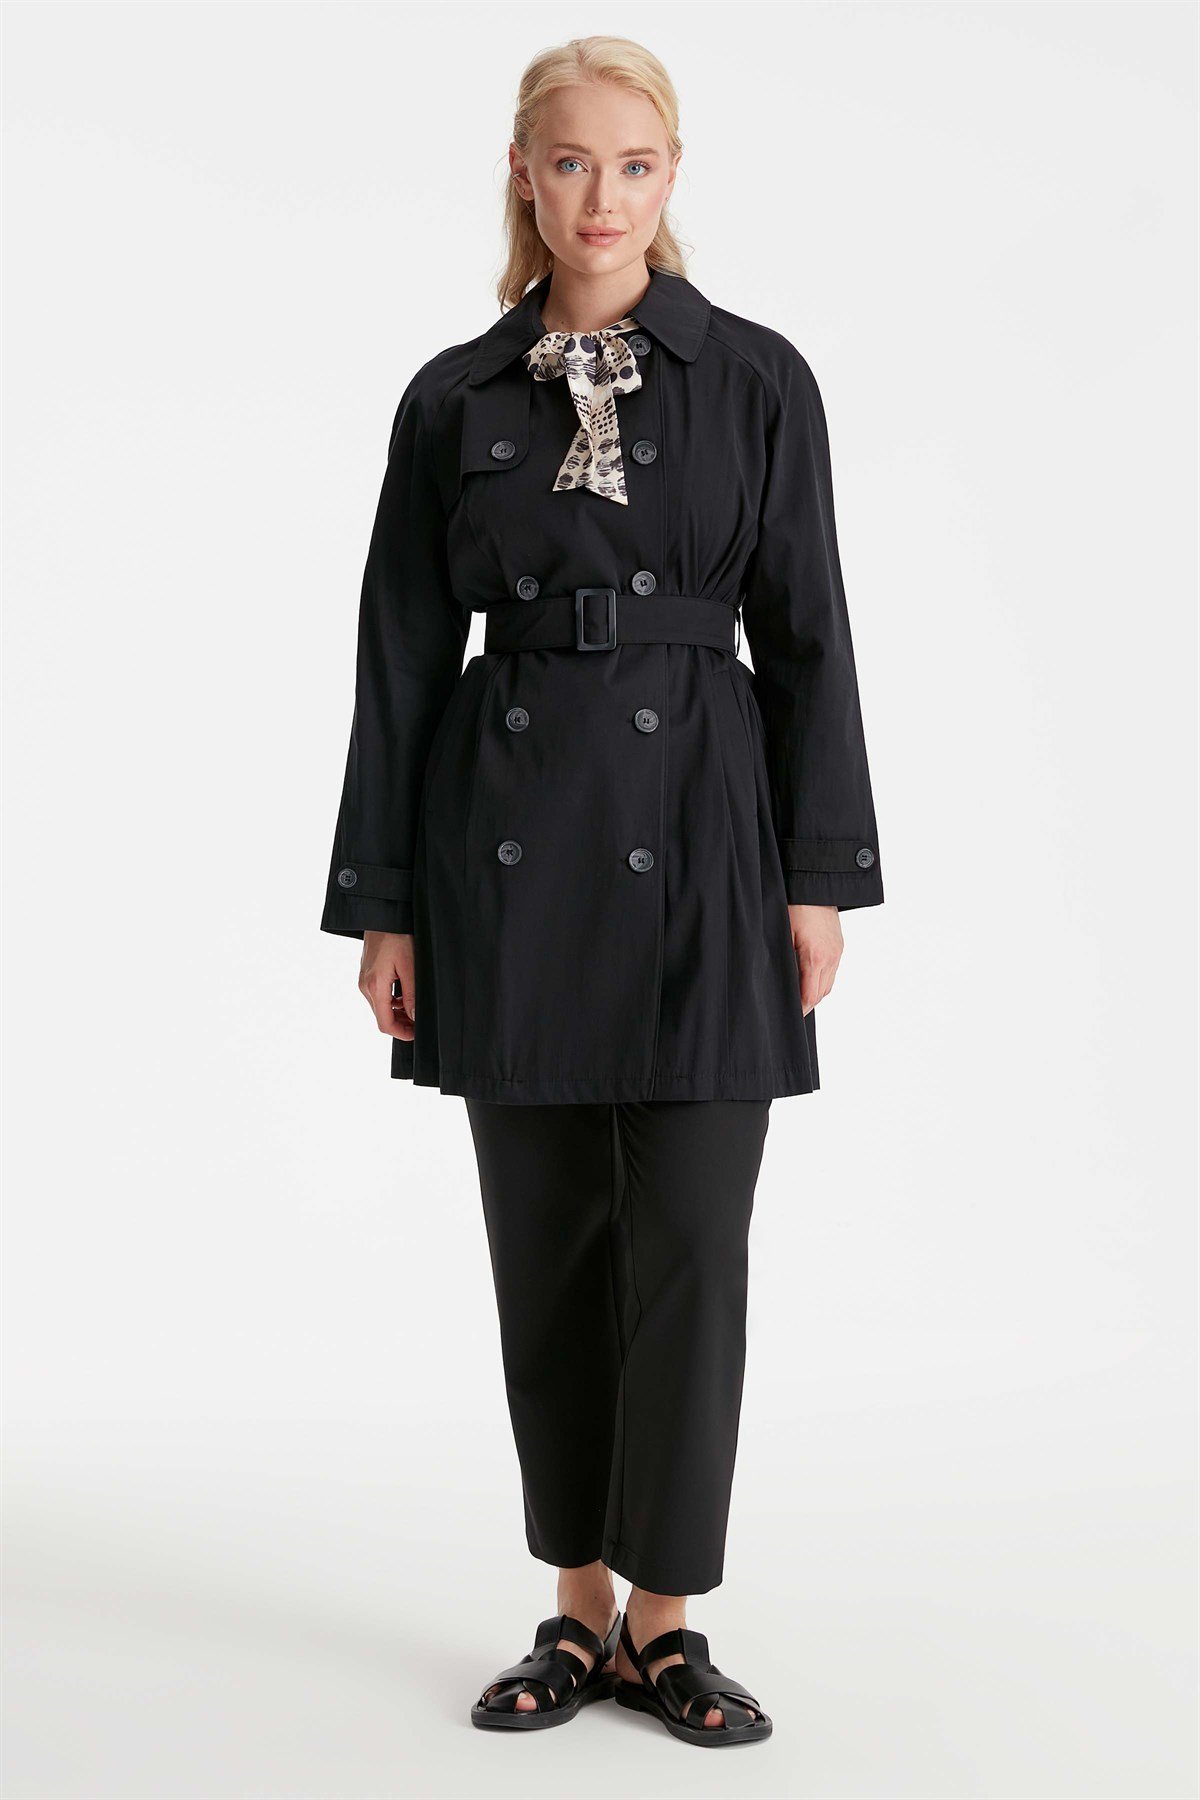 Double Breasted Closure Raglan Sleeve Trench Coat - Black